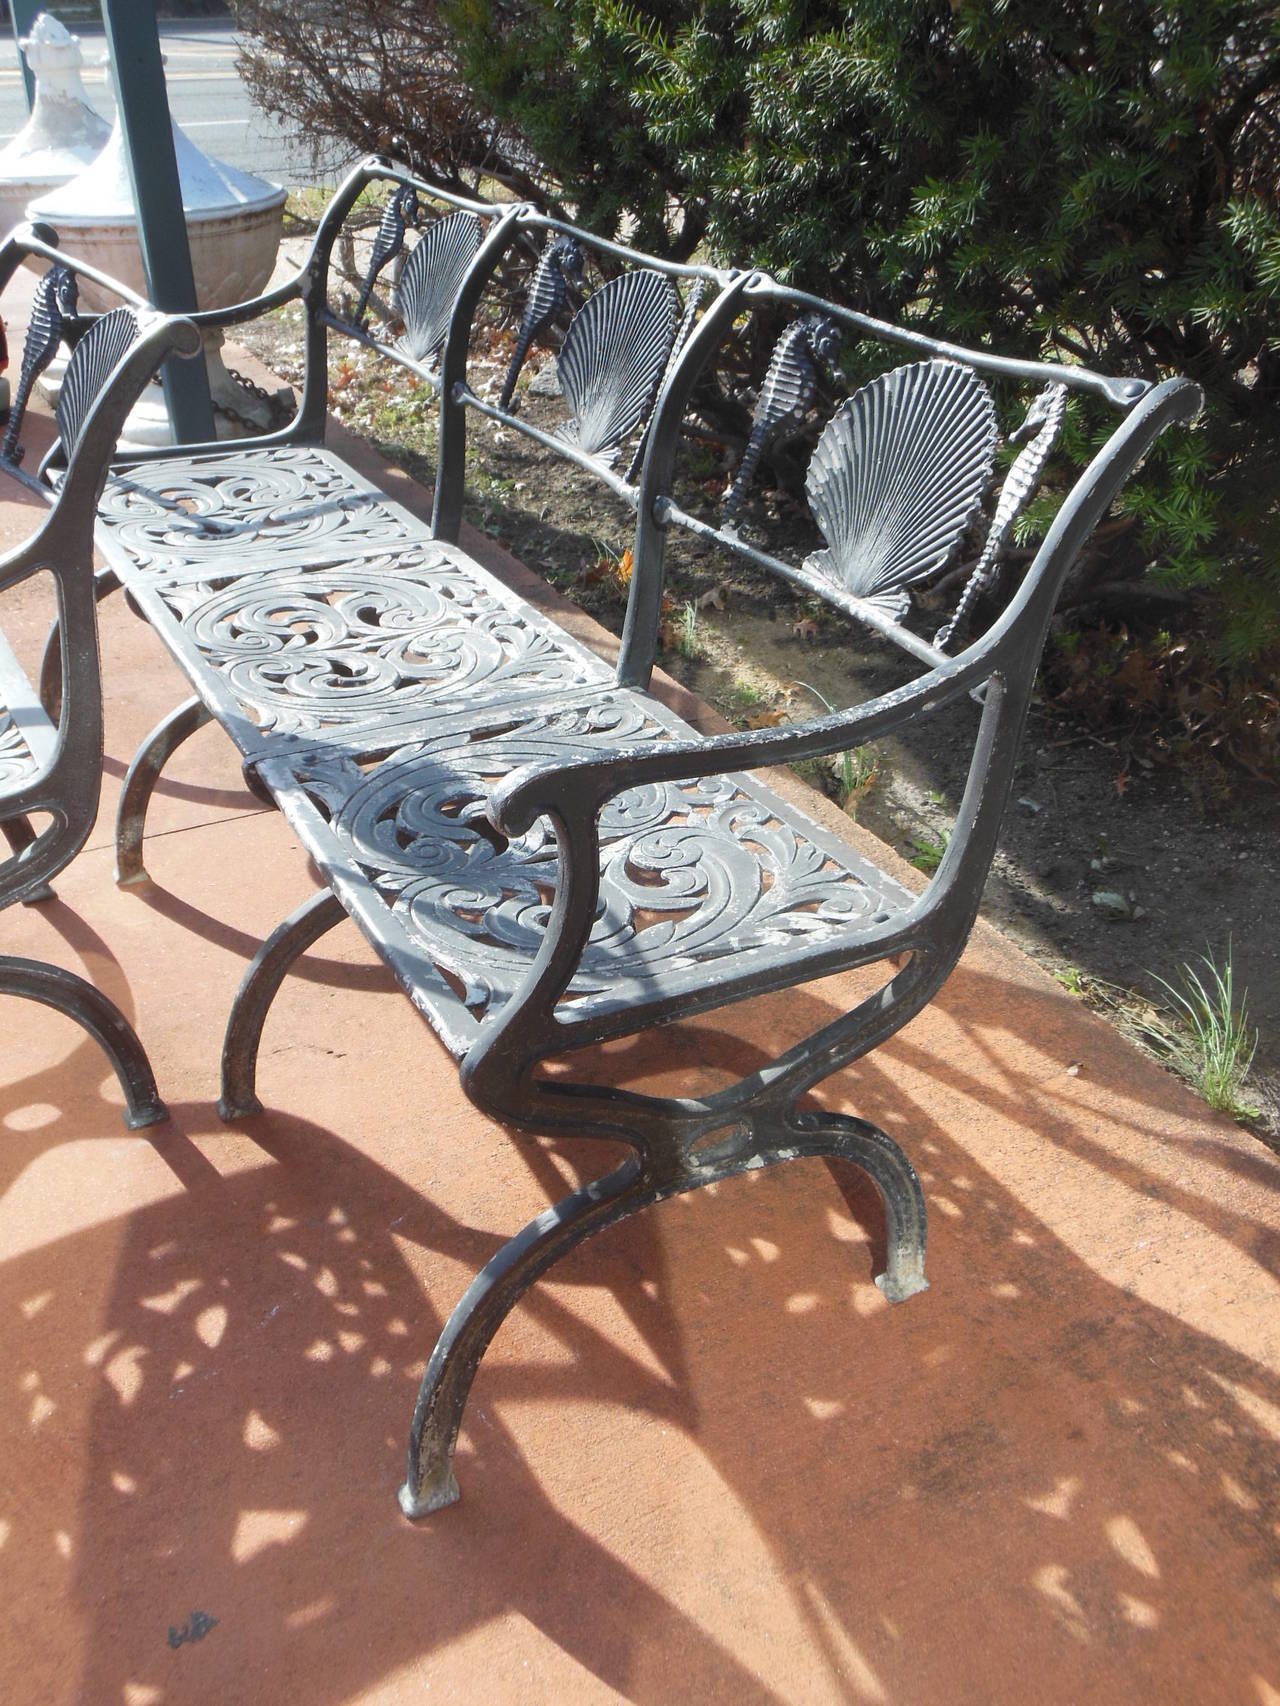 American Patio Set by Molla for the Garden or Sea Shore with Shells and Sea Horse